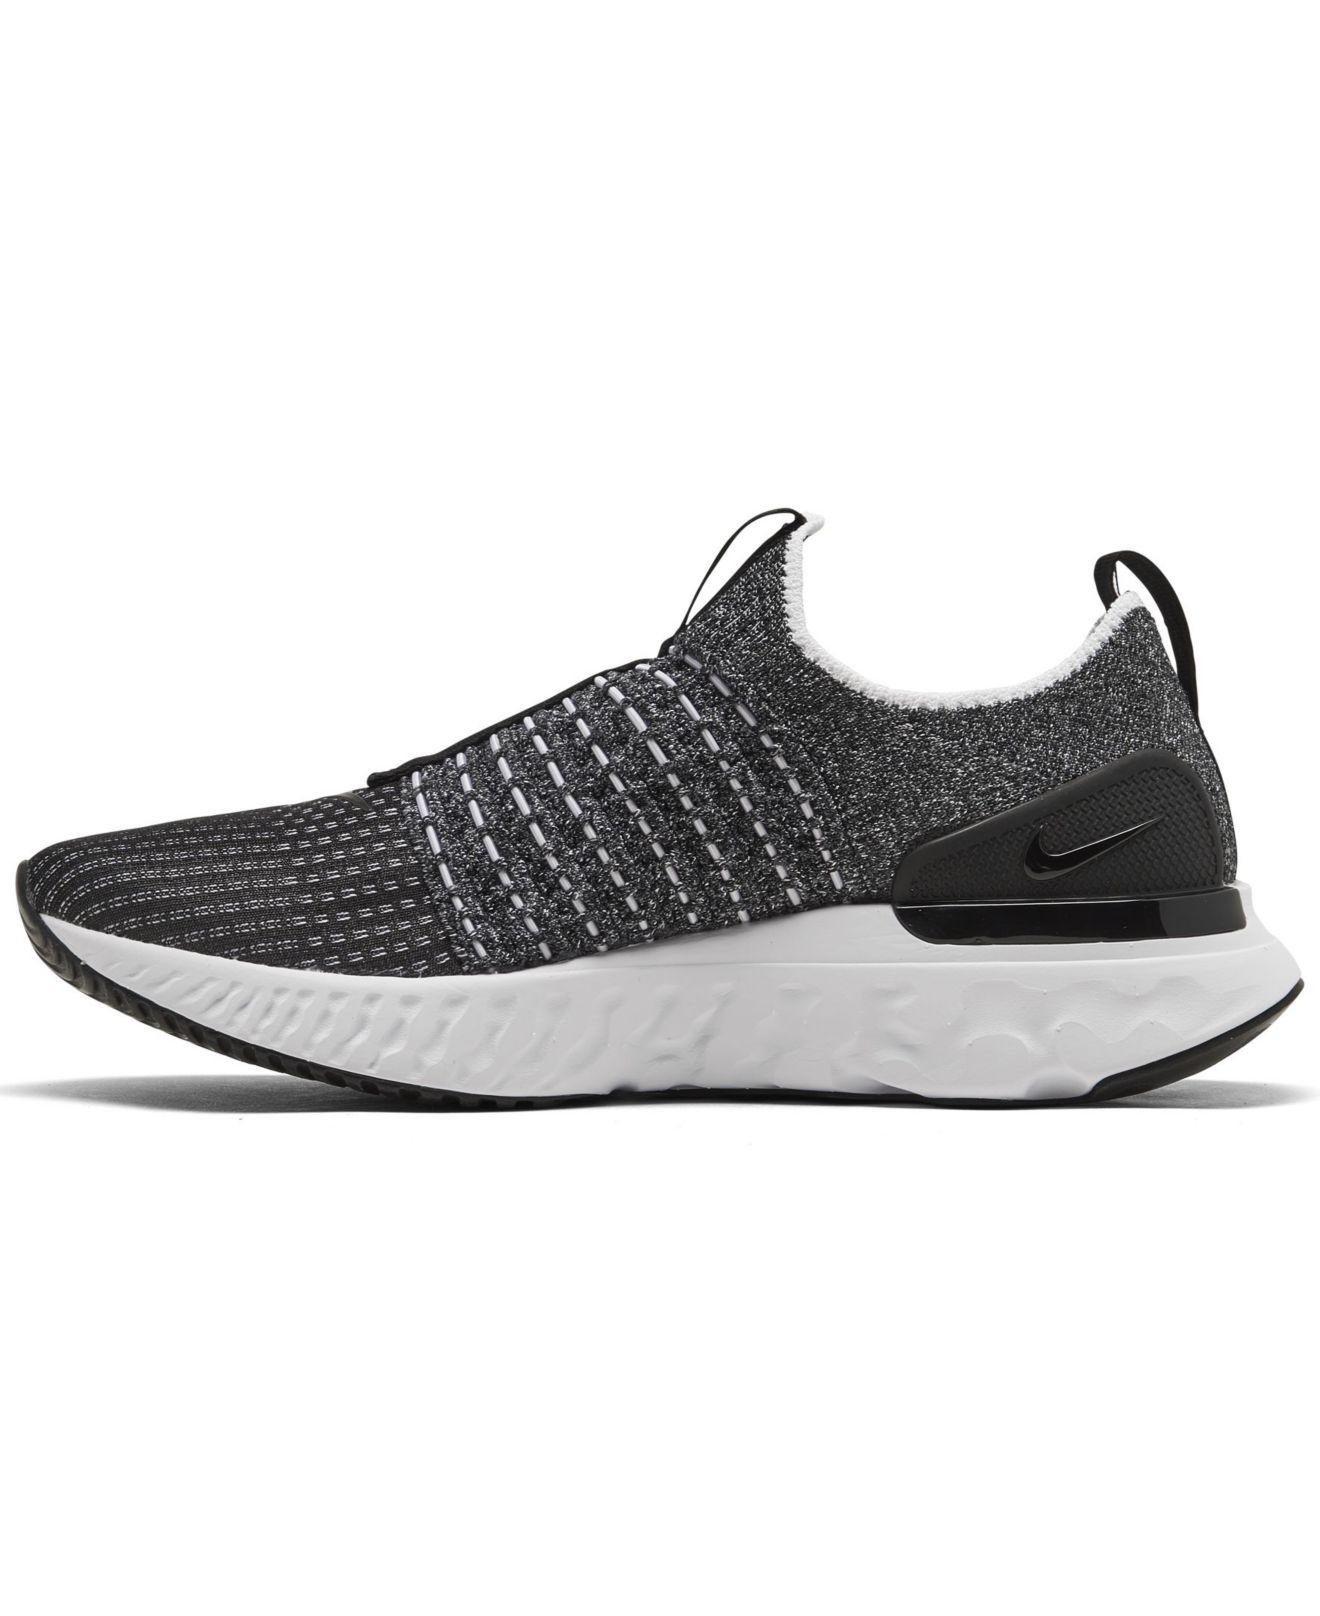 Nike Lace React Phantom Run Flyknit 2 Sneakers From Finish Line in ...